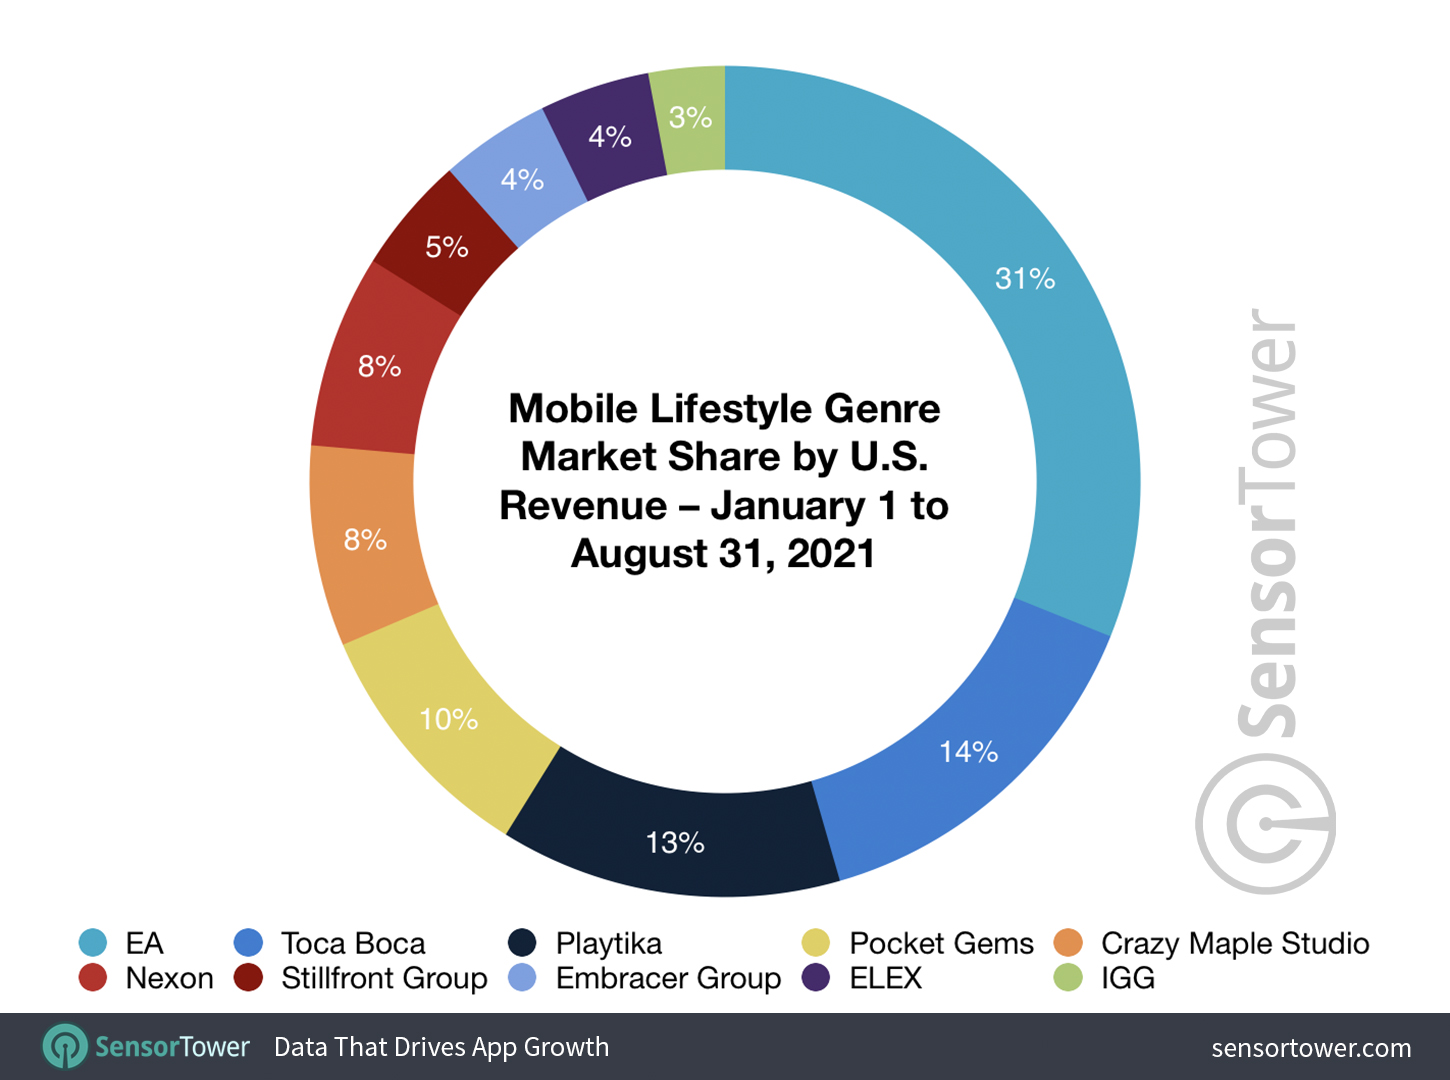 Mobile Lifestyle Genre Market Share by U.S. Revenue – January 1 to August 31, 2021